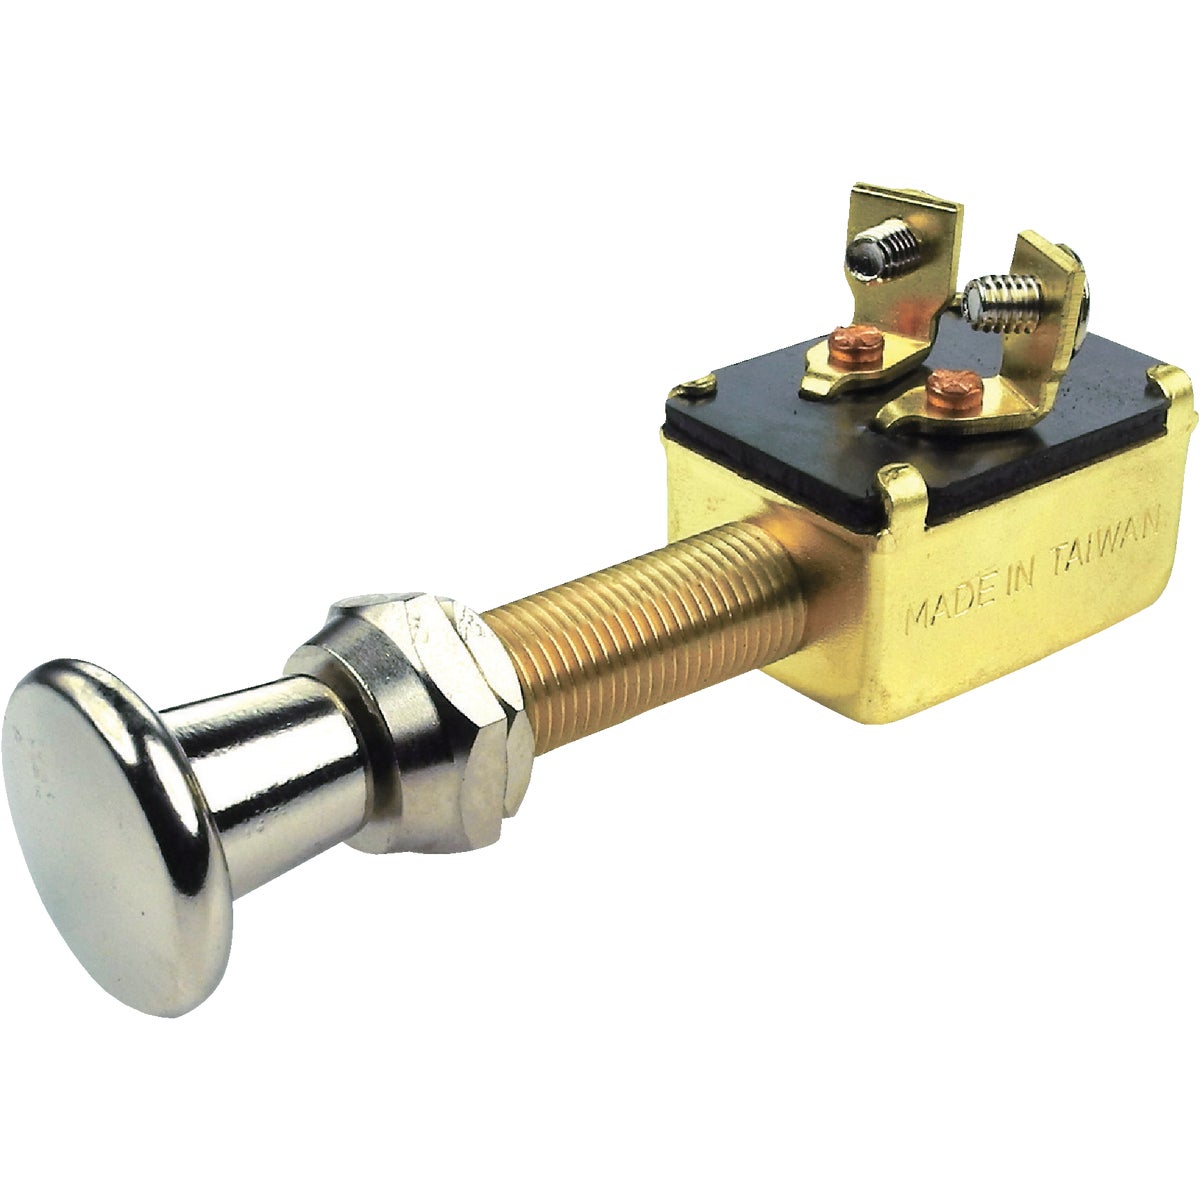 Item 586080, Push-pull switch featuring a chrome-plated brass face nut, washer, and back